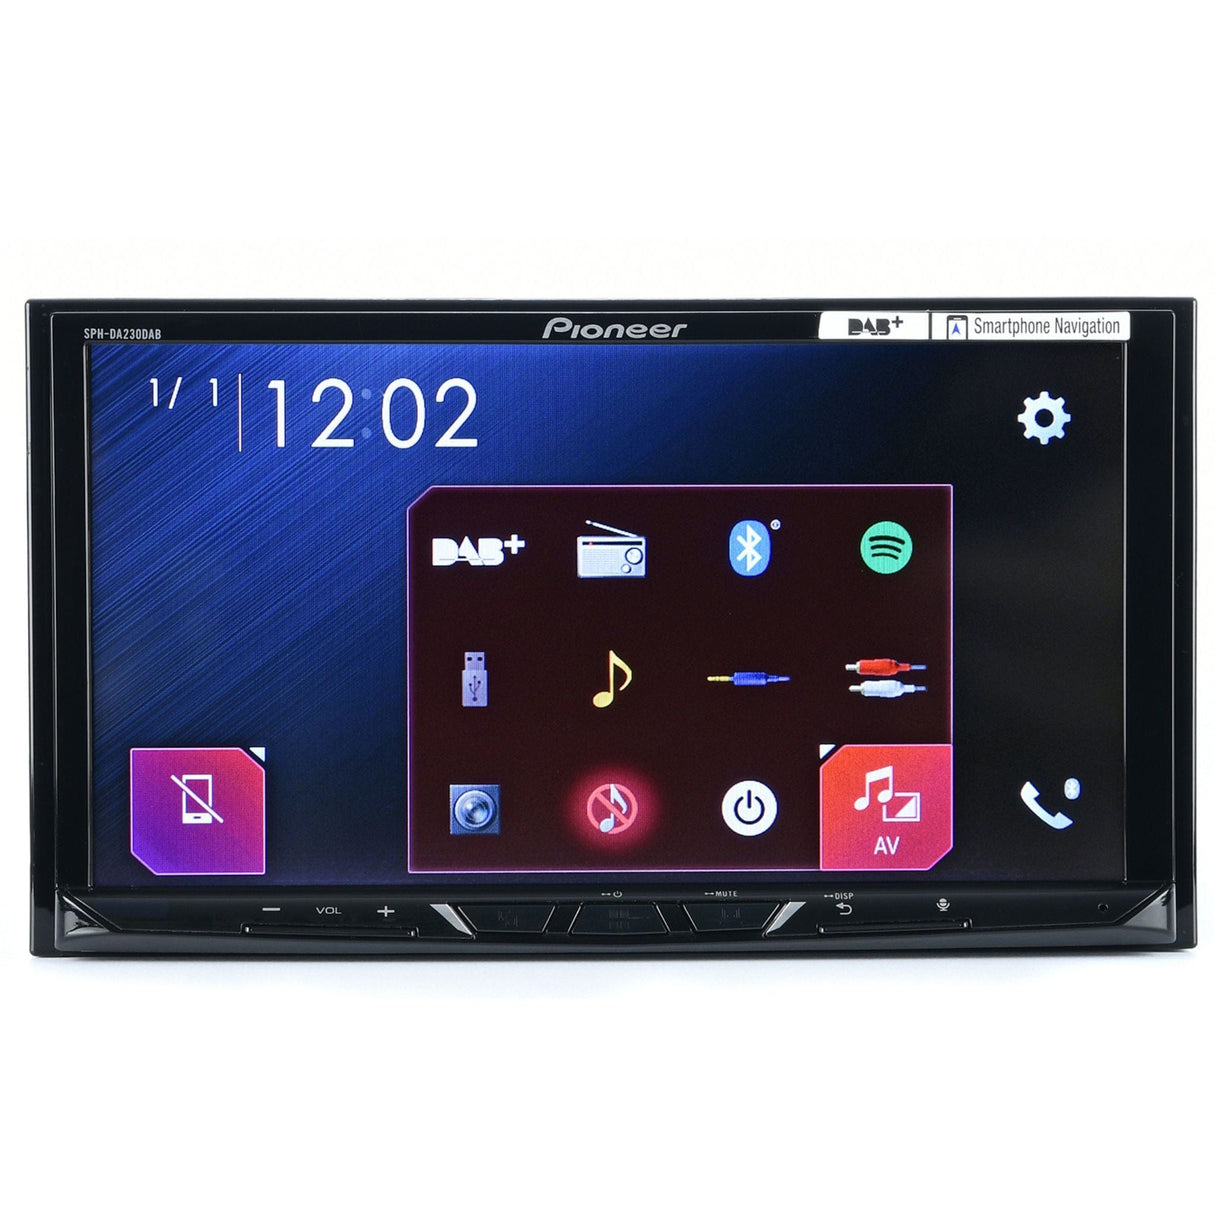 Pioneer Car Stereos Pioneer SPH-DA230DAB Mechless Double Din Stereo with Apple Car Play / Android Auto